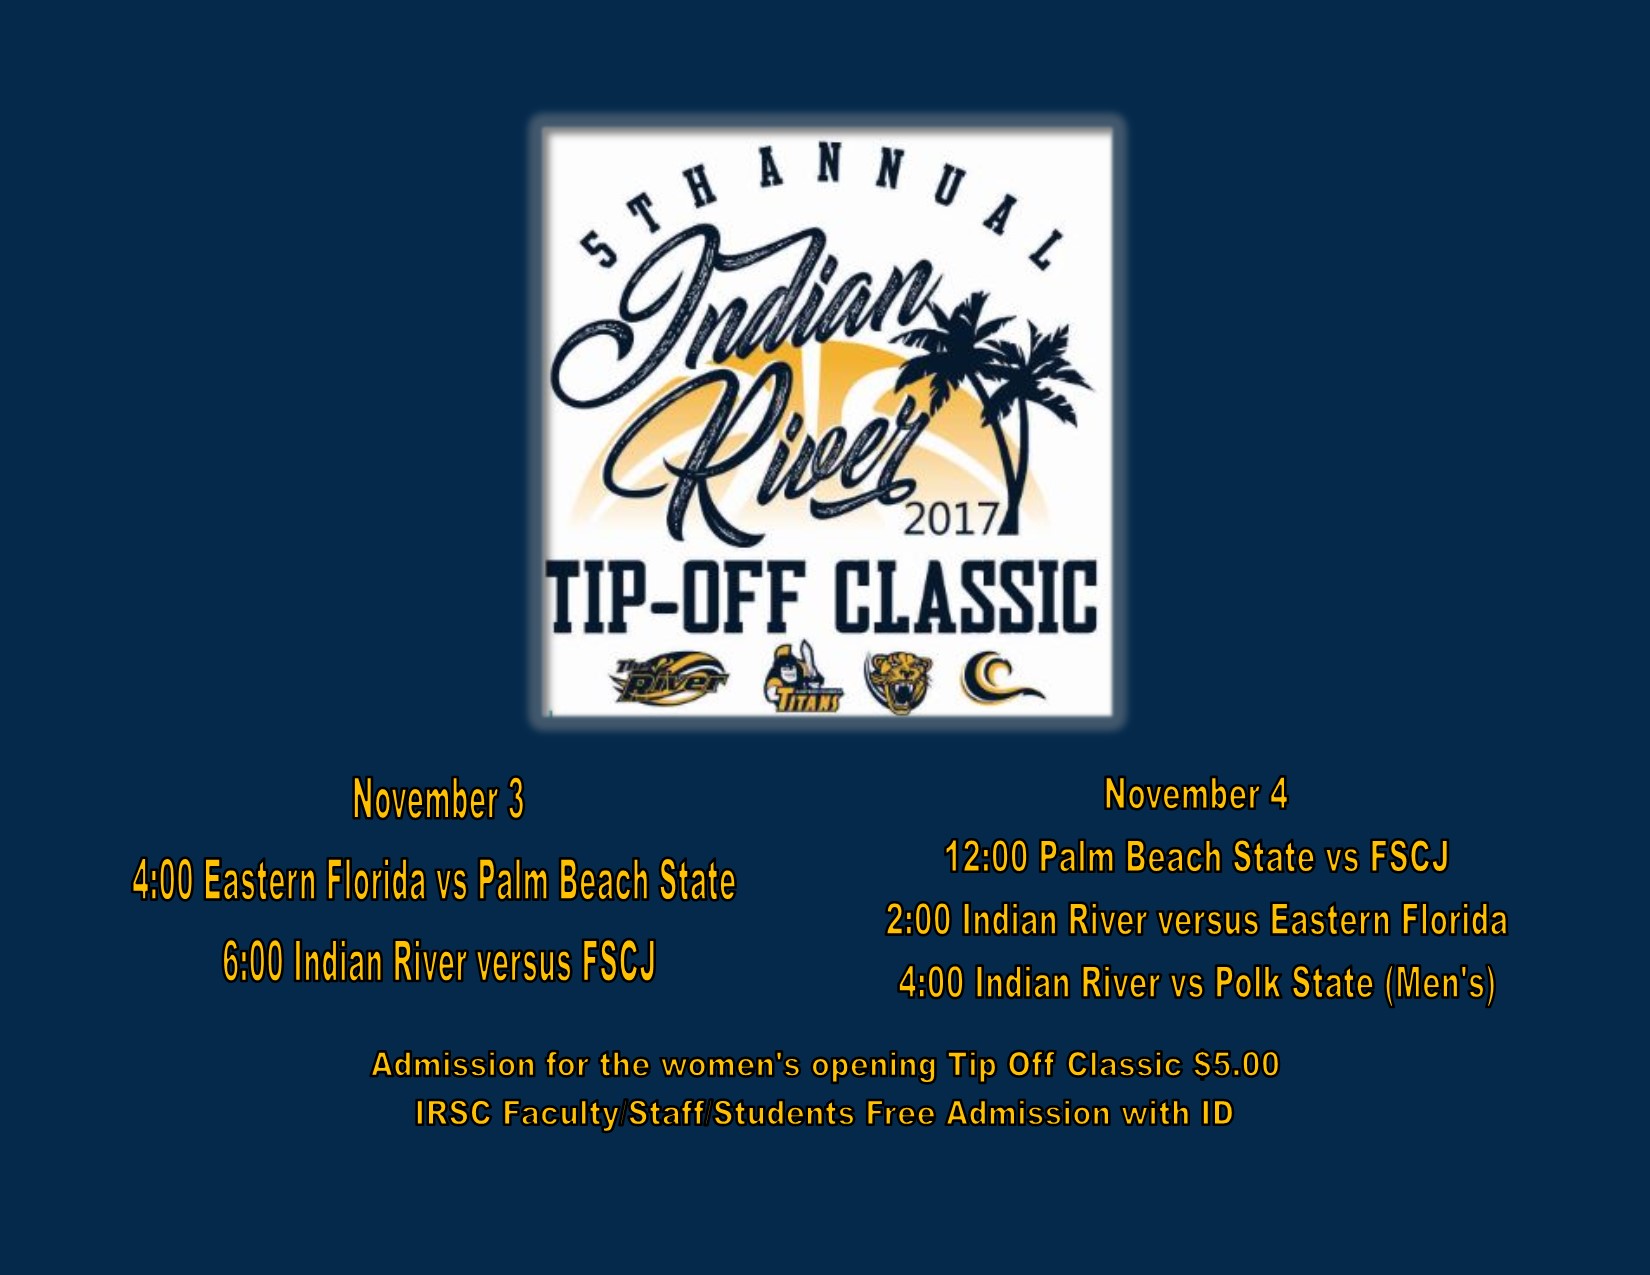 5th Annual Indian River Tip-Off Classic Nov 3-4